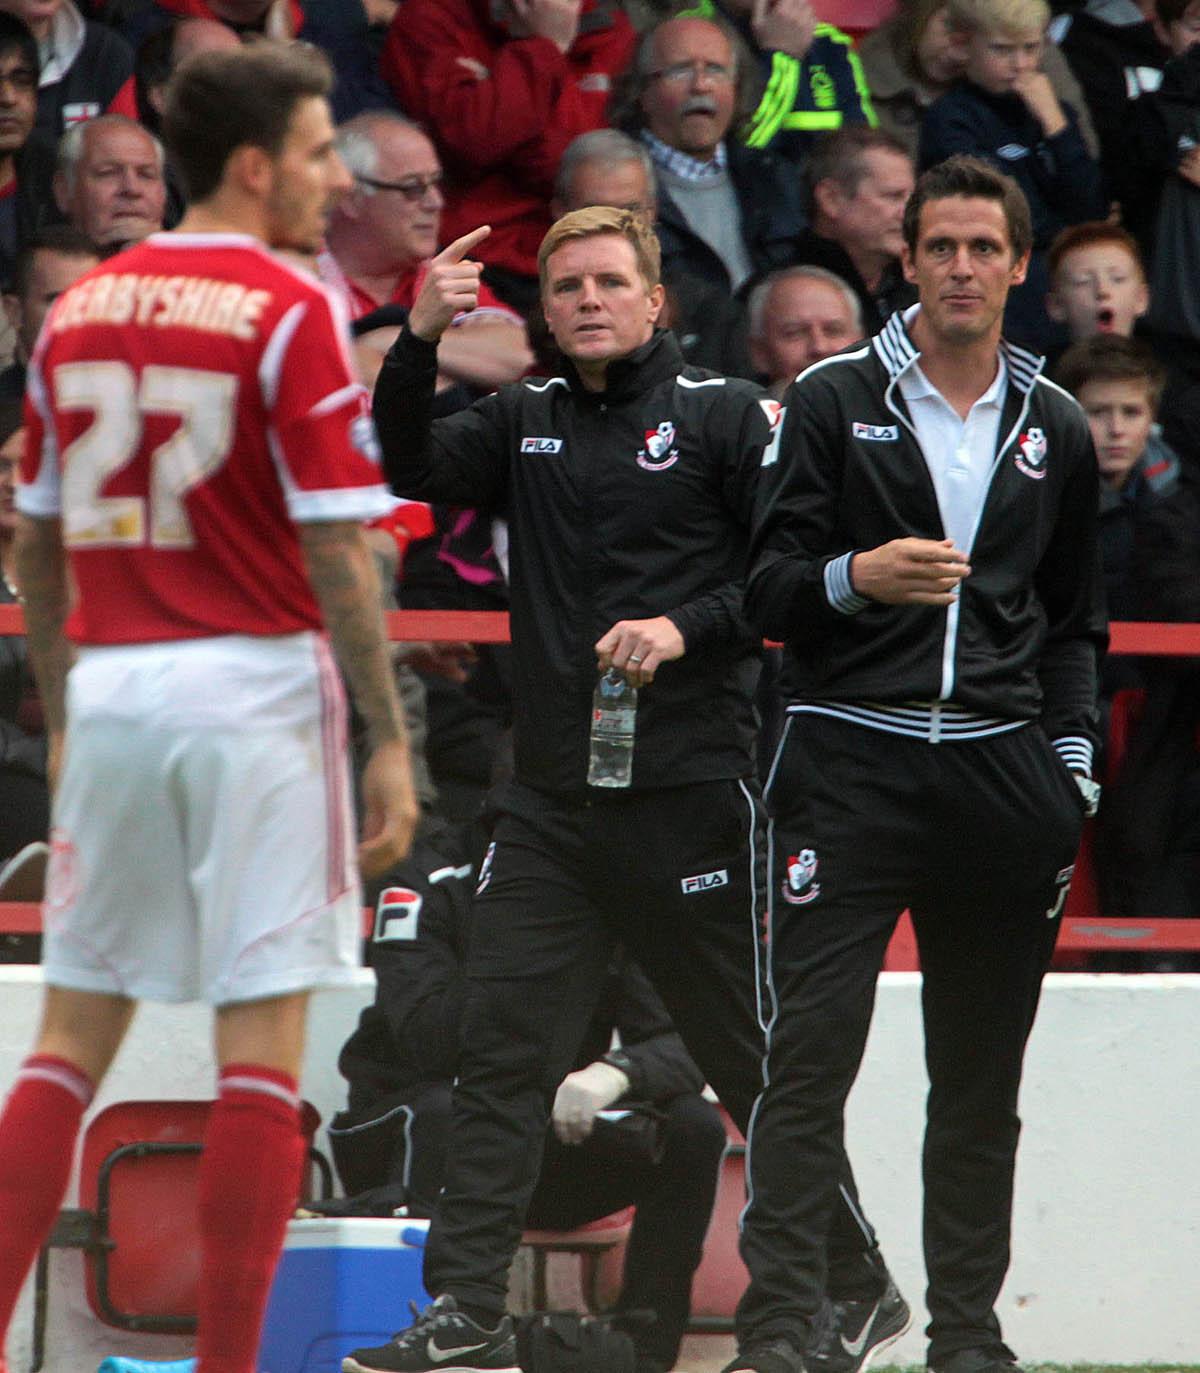 All our pictures from Nottingham Forest v AFC Bournemouth at The City Ground on Saturday, October 19,2013